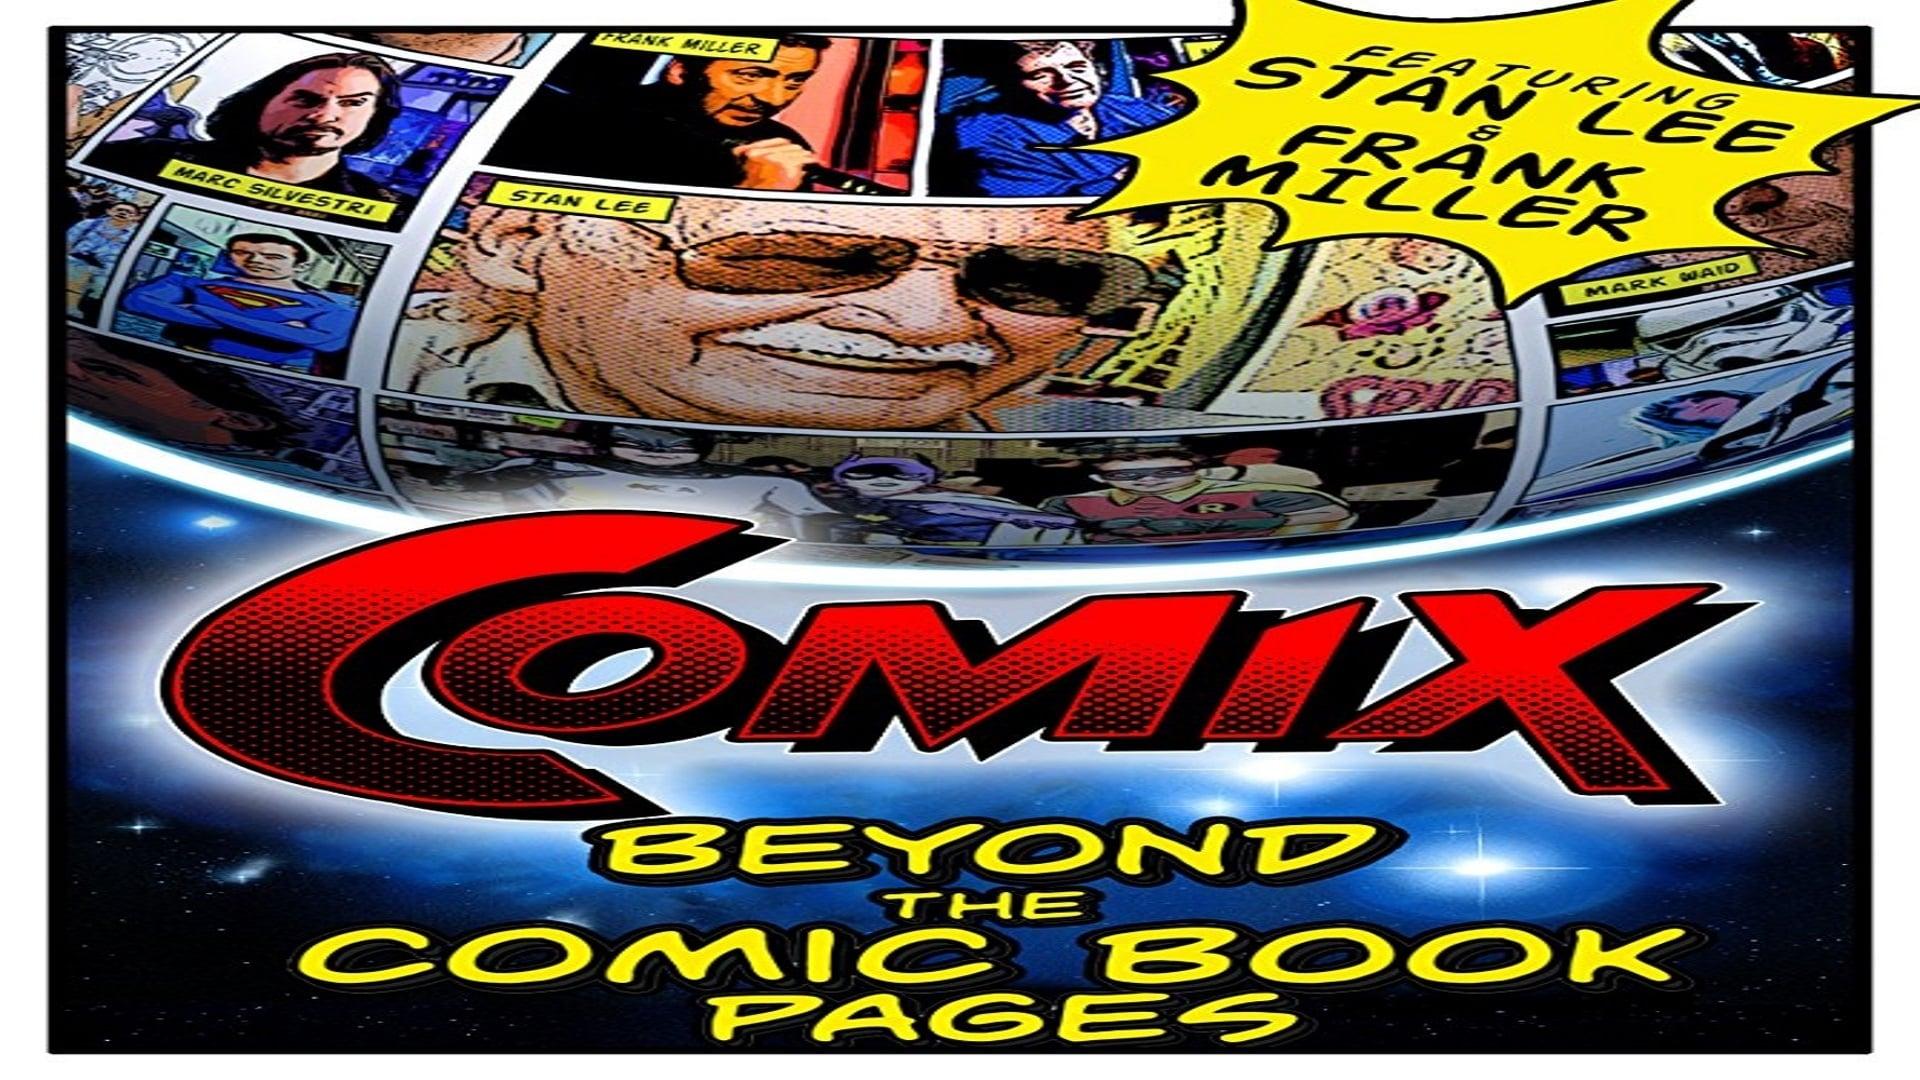 COMIX: Beyond the Comic Book Pages backdrop